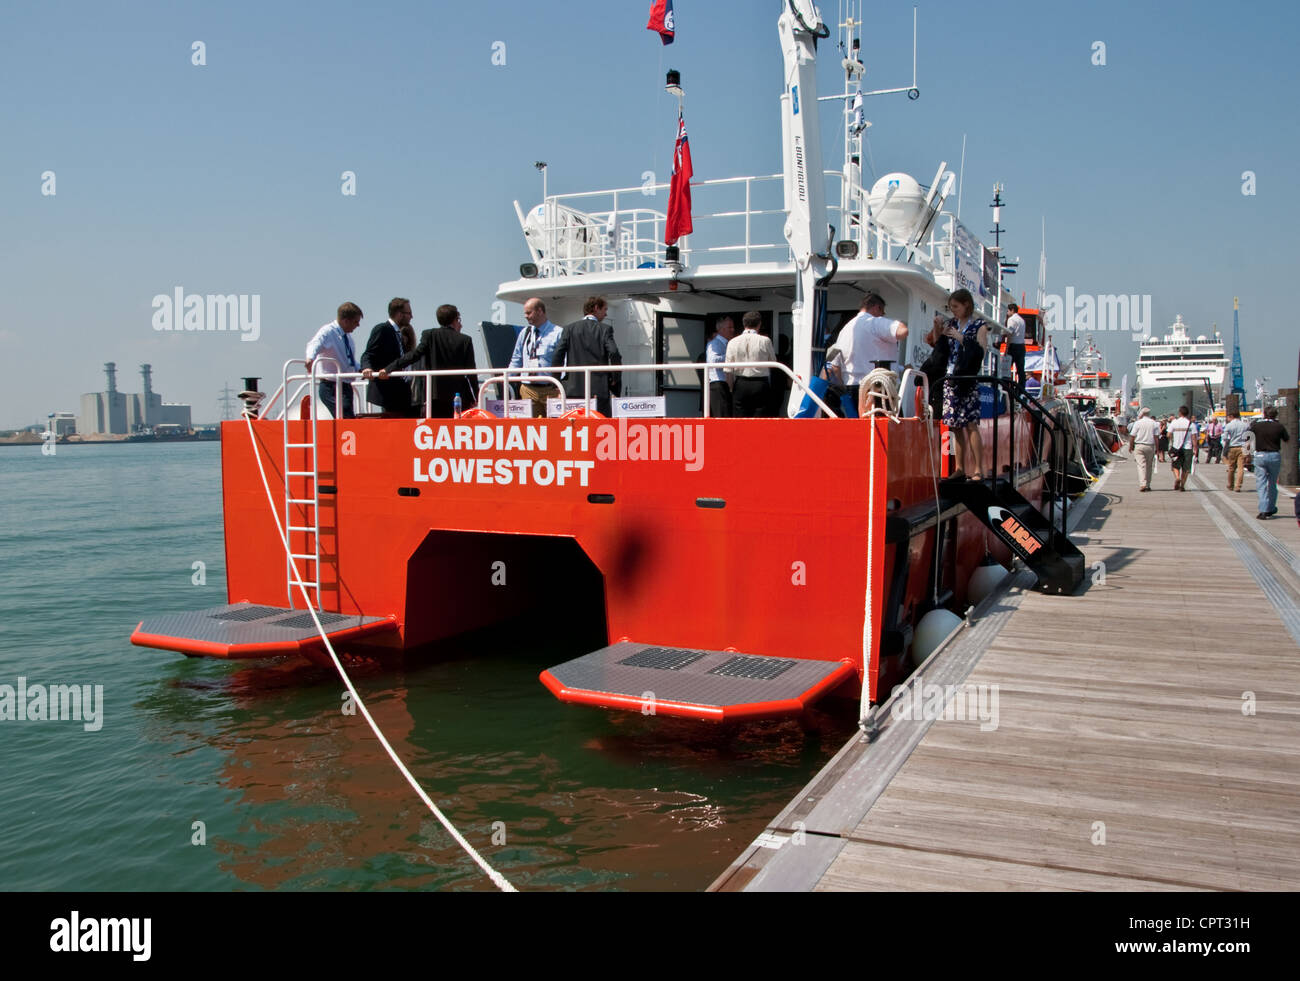 The stern of a large catamaran wokrboat in dock at Southampton. Stock Photo